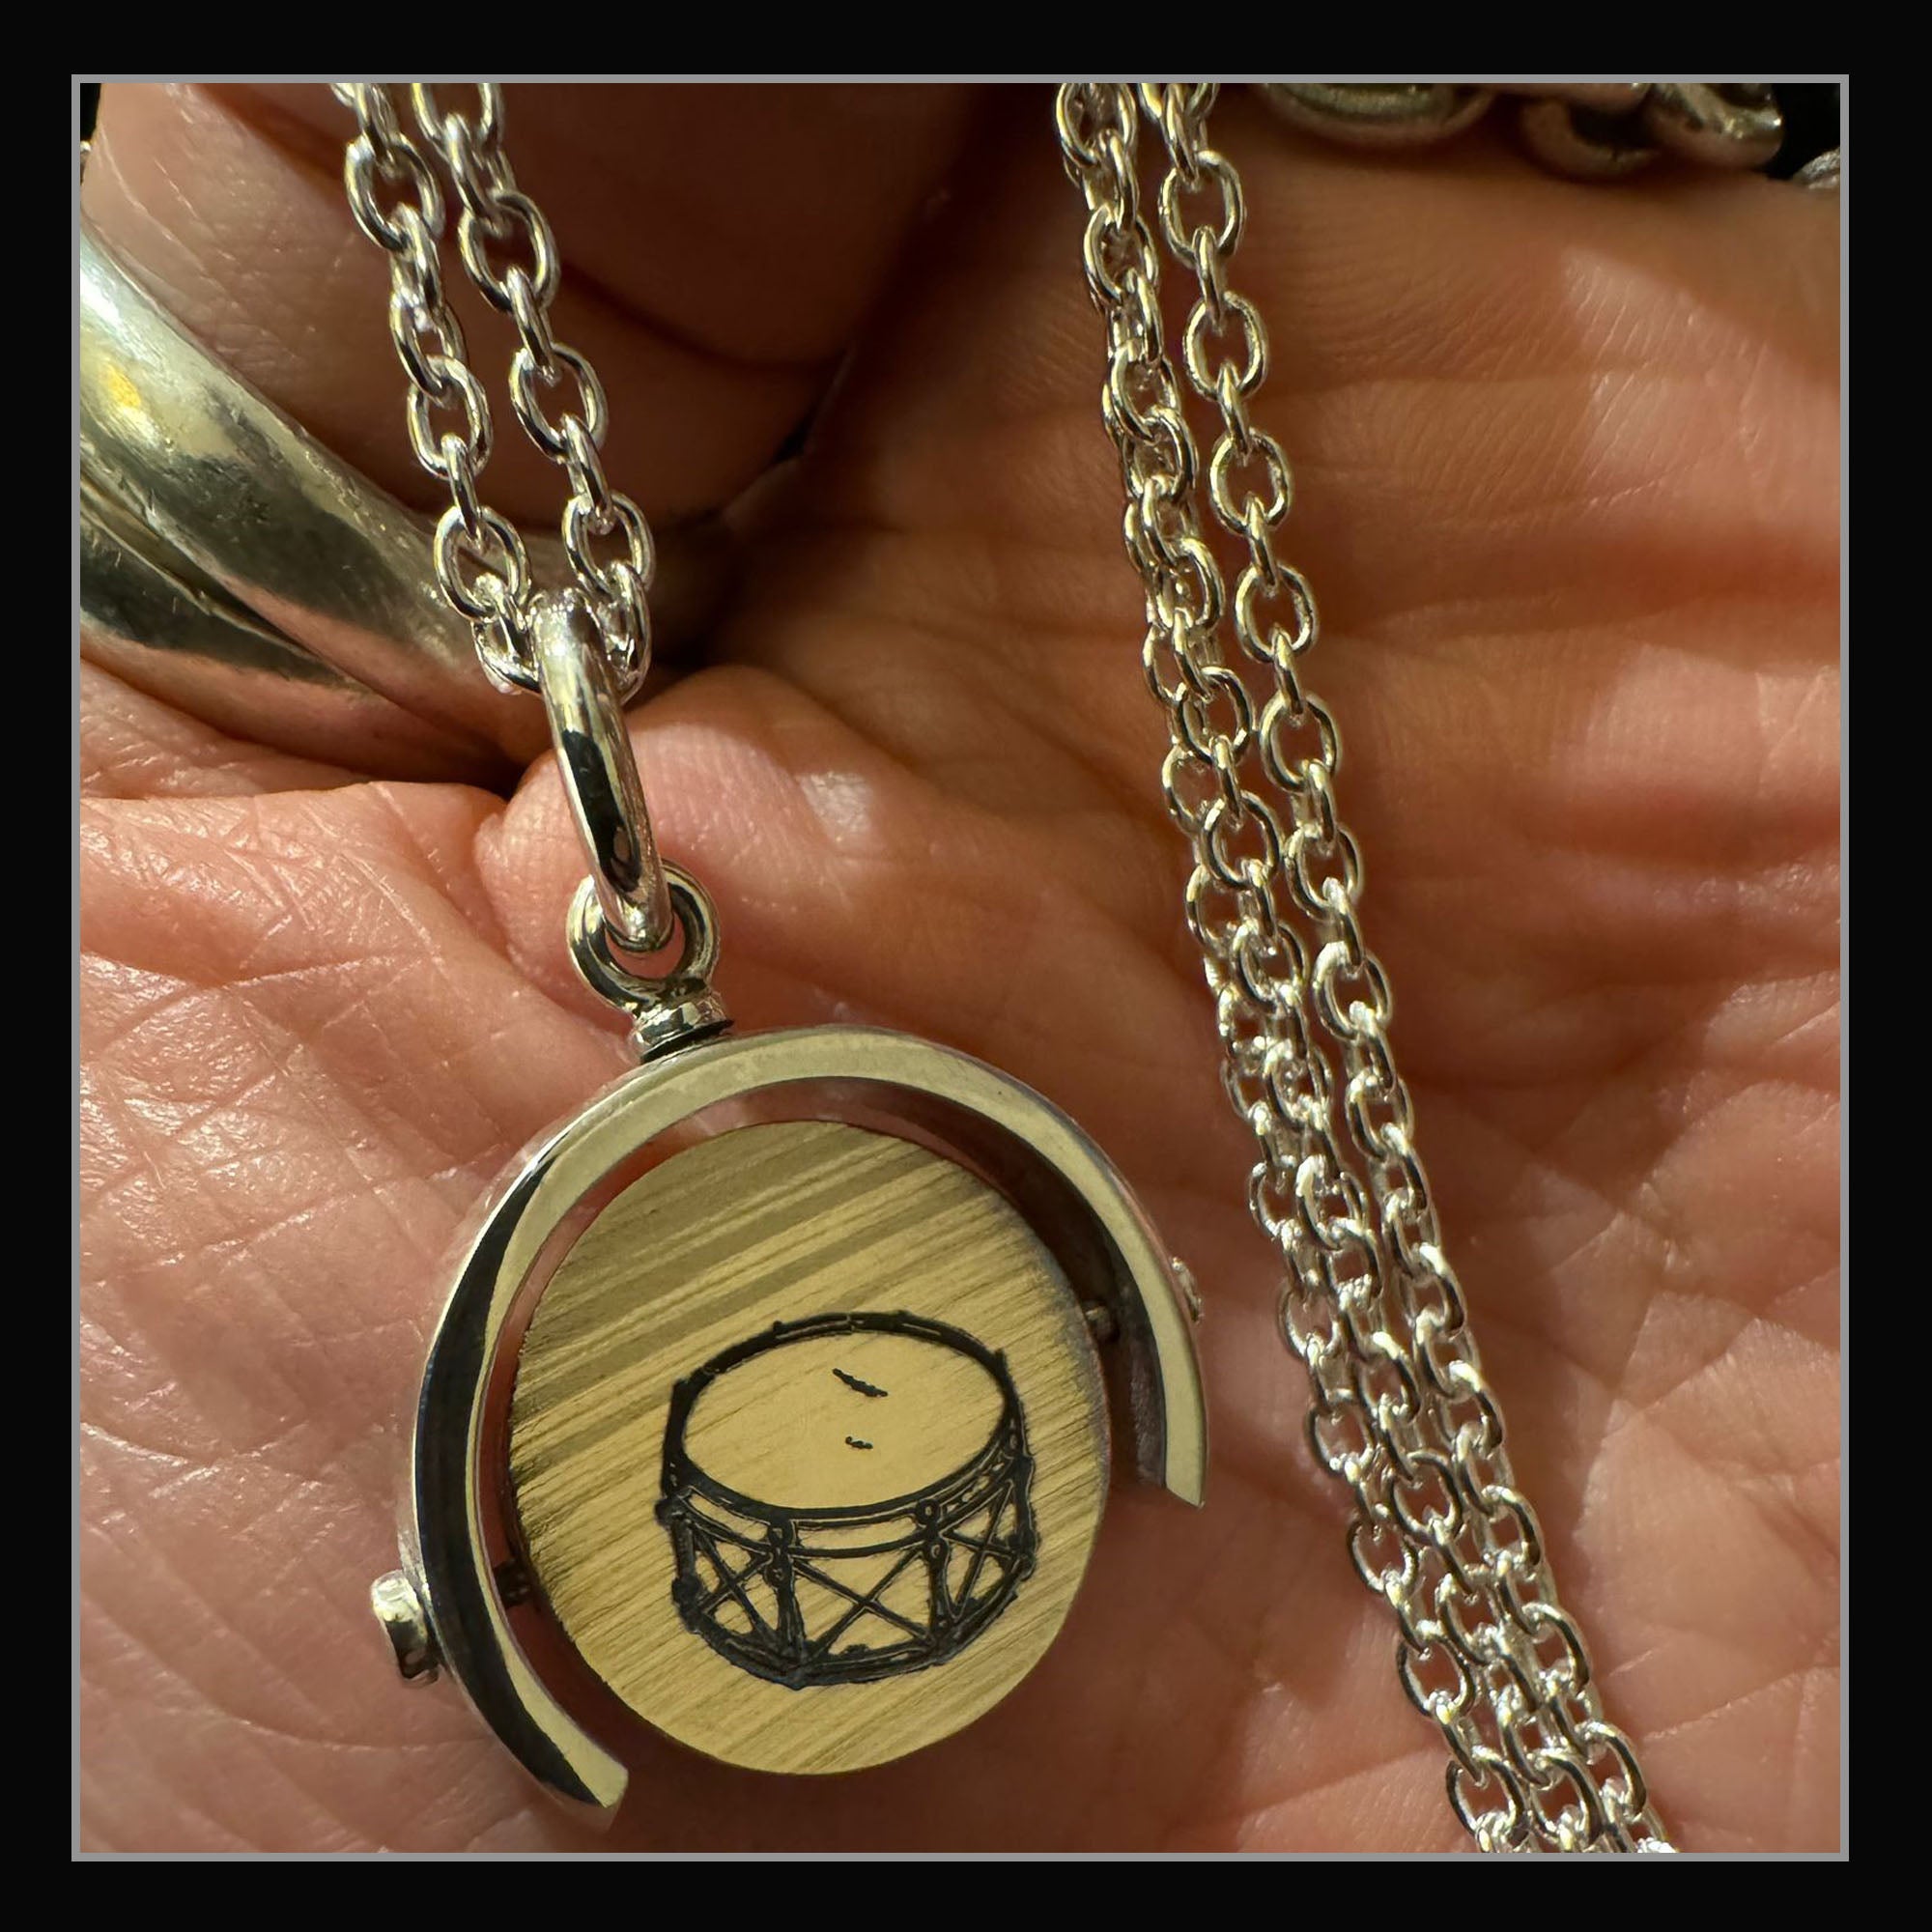 Roger Taylor - Taylored 'Drum' Spinner Pendant Second Batch.